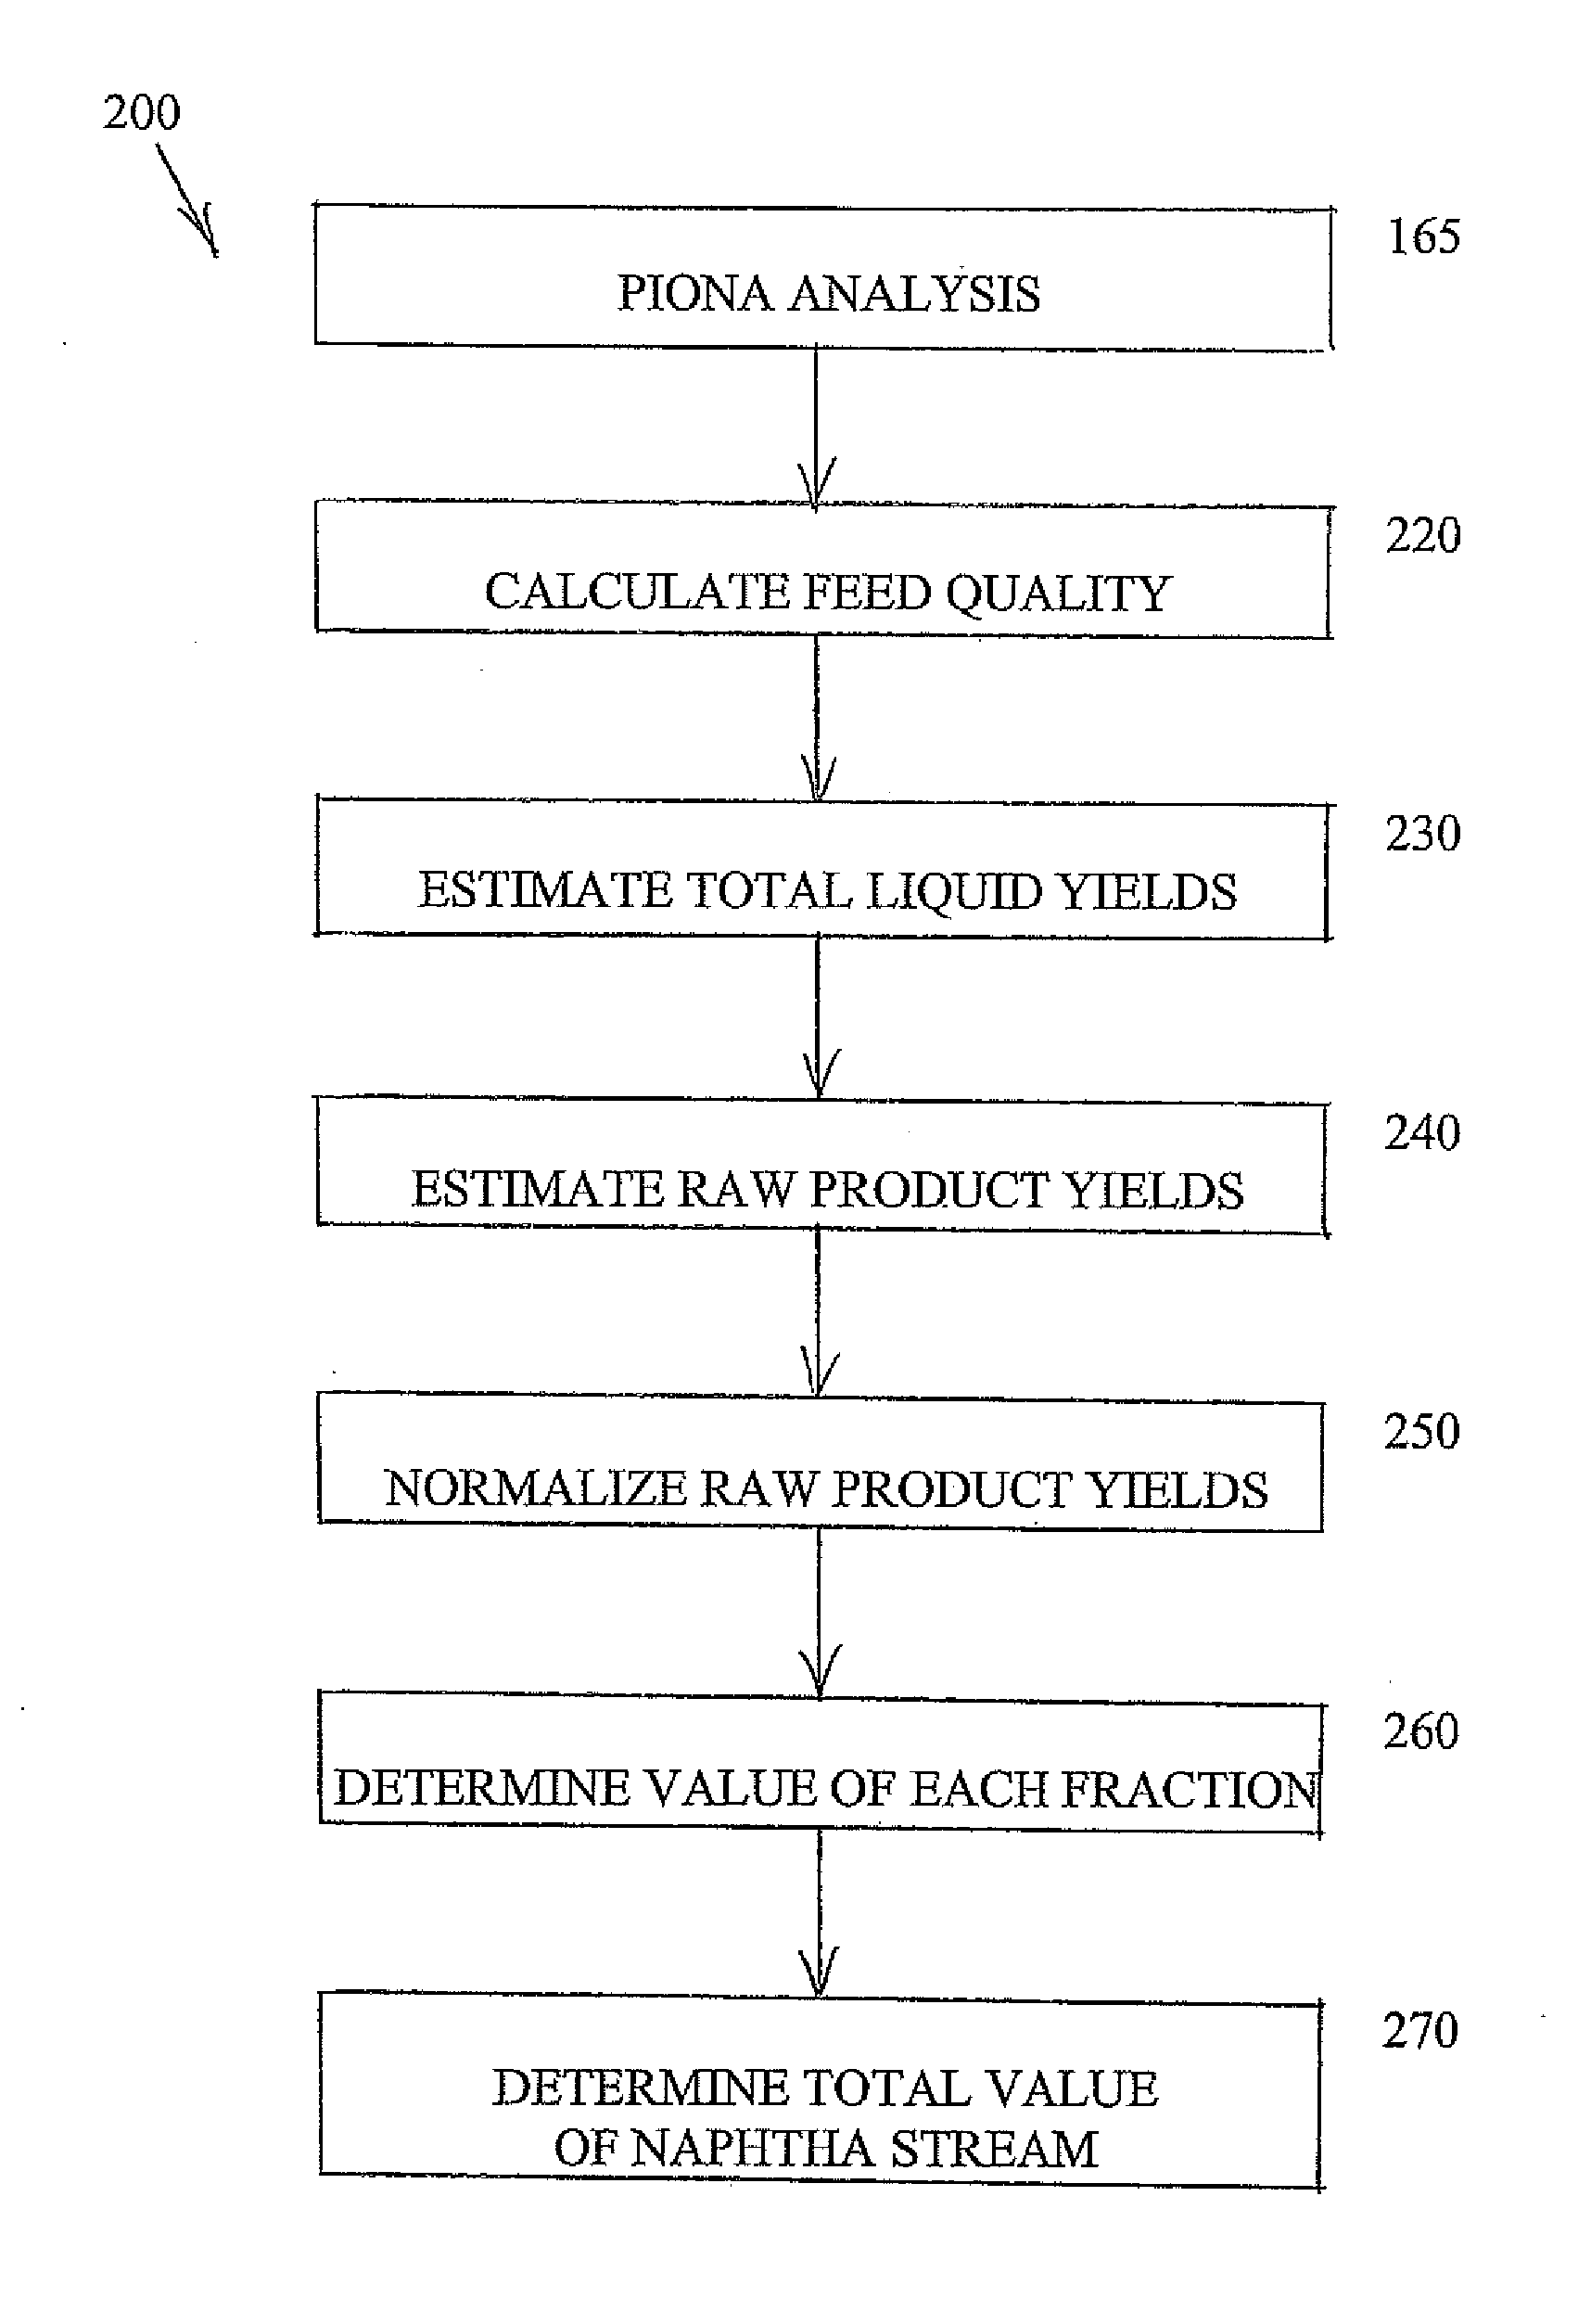 Relative valuation method for naphtha streams